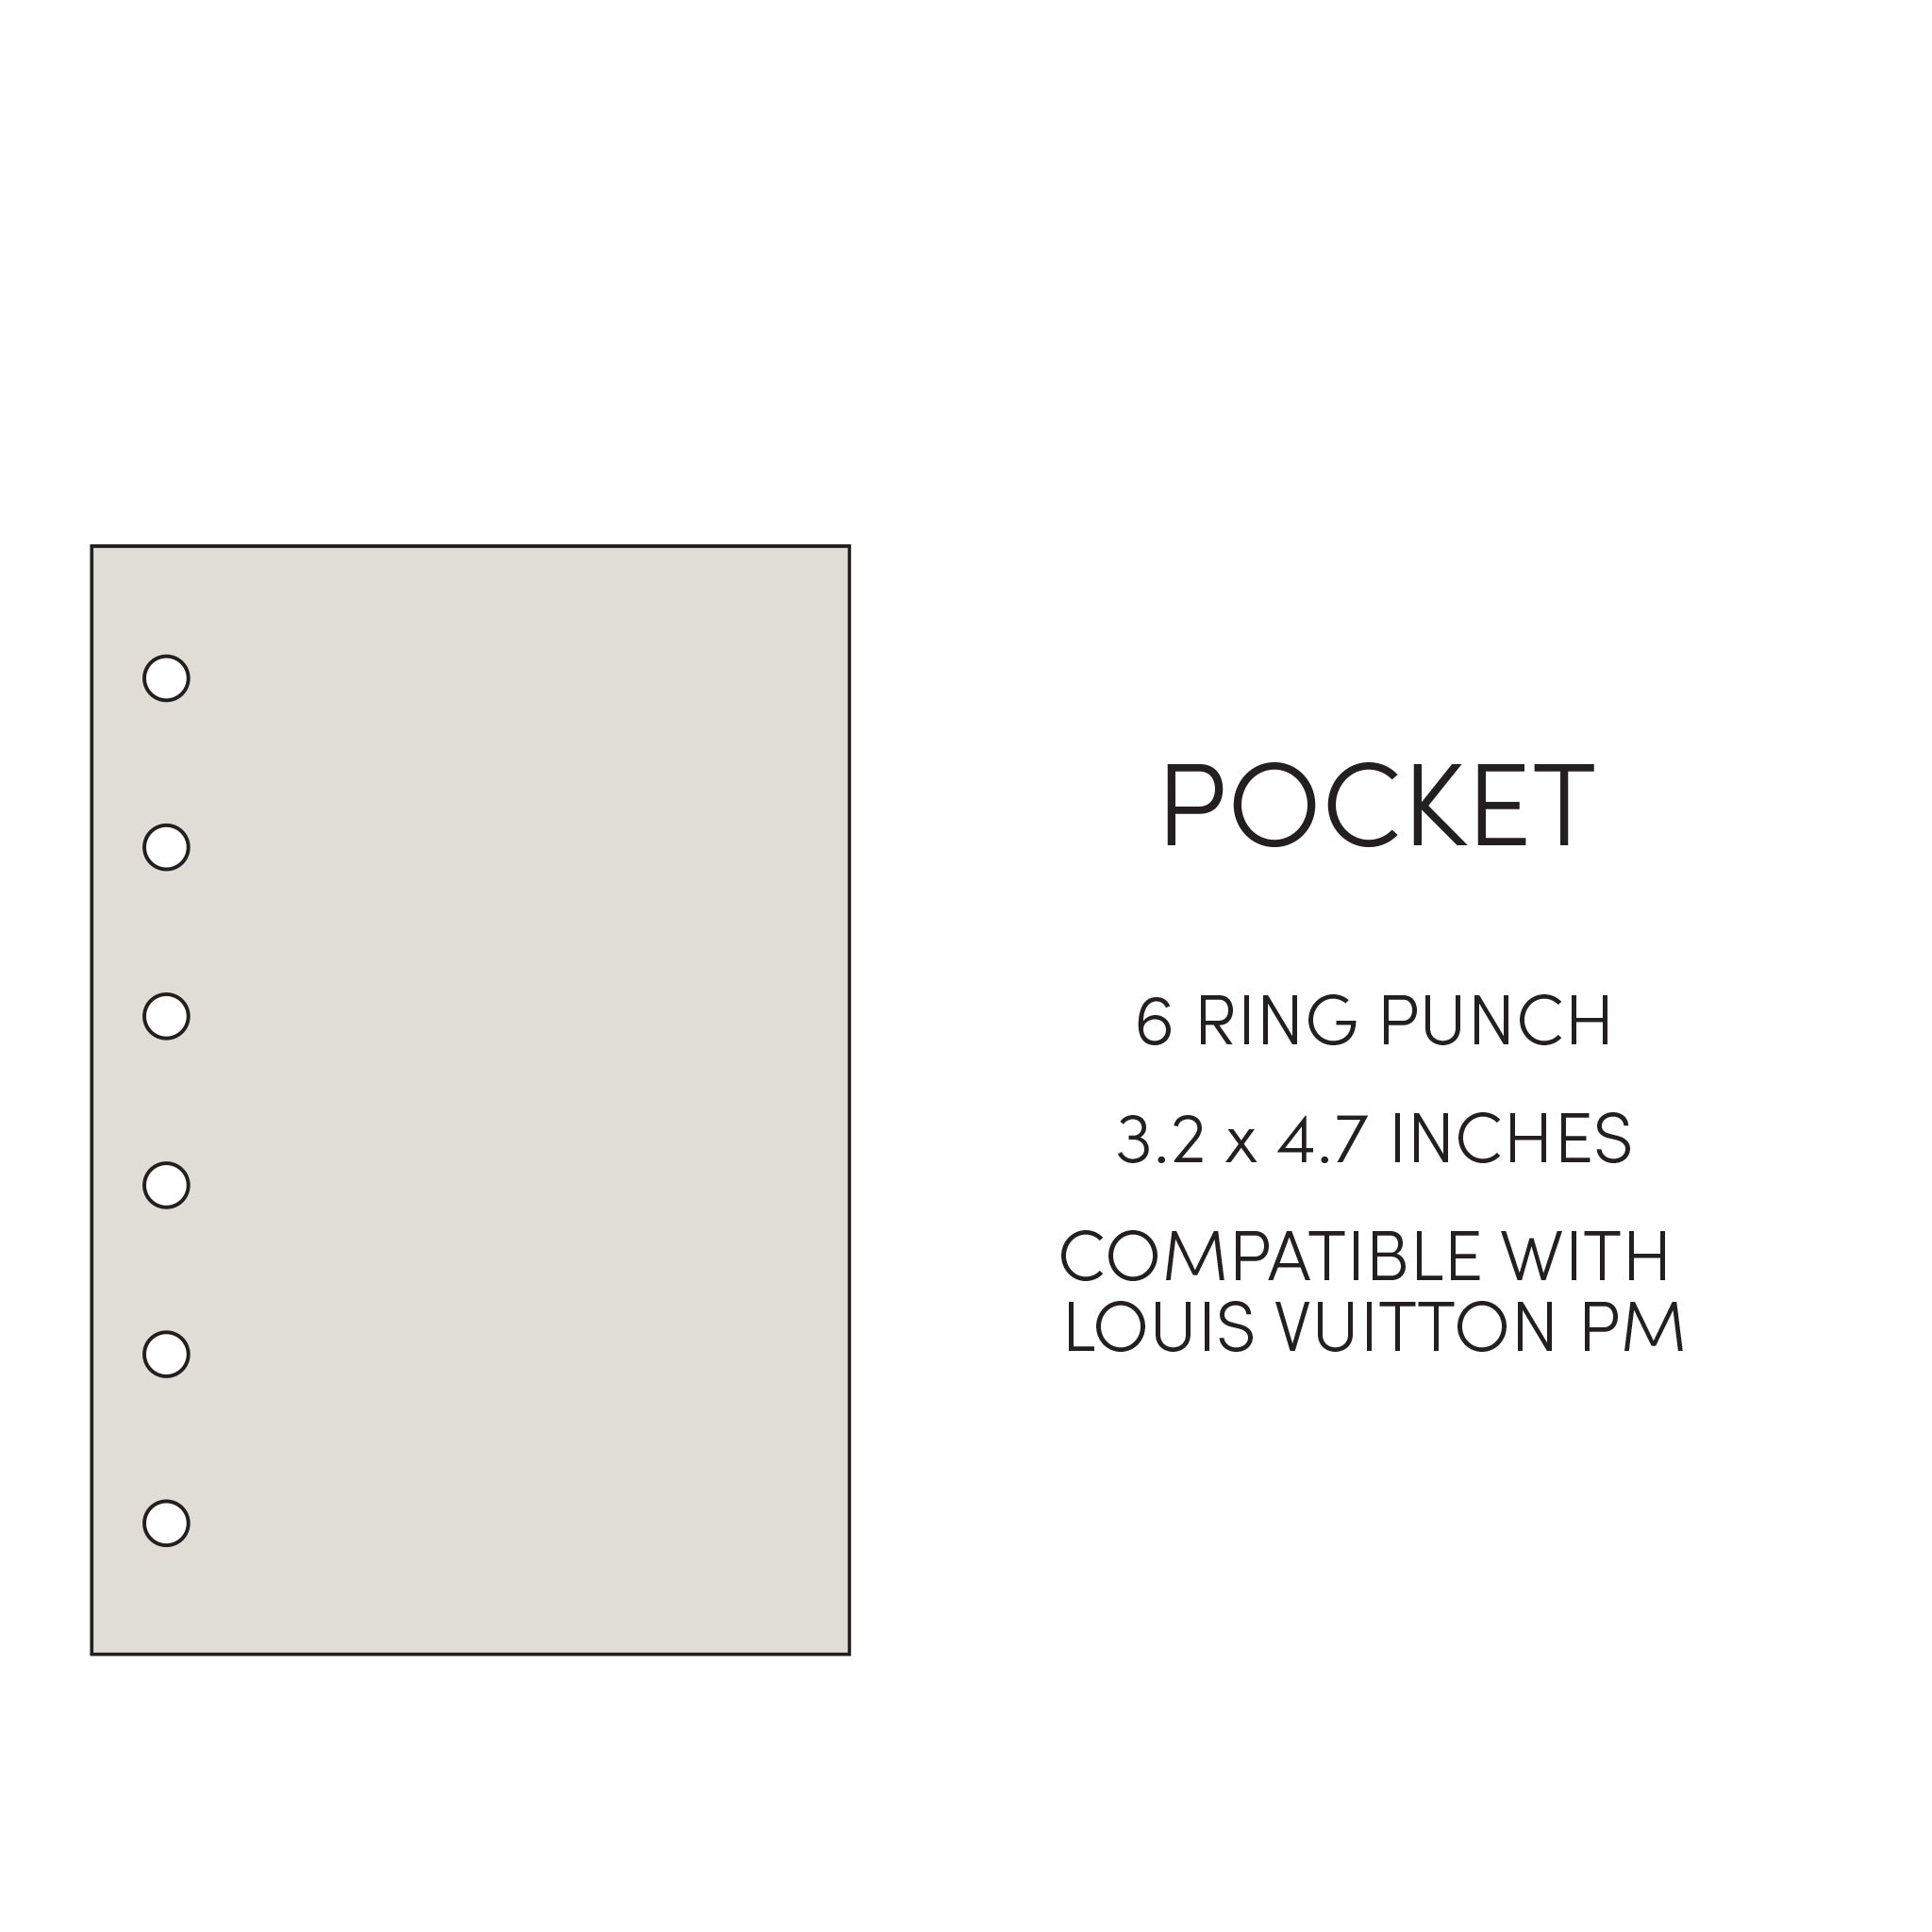 Cloth and Paper size guide - Pocket - 3.2 x 4.7 inches